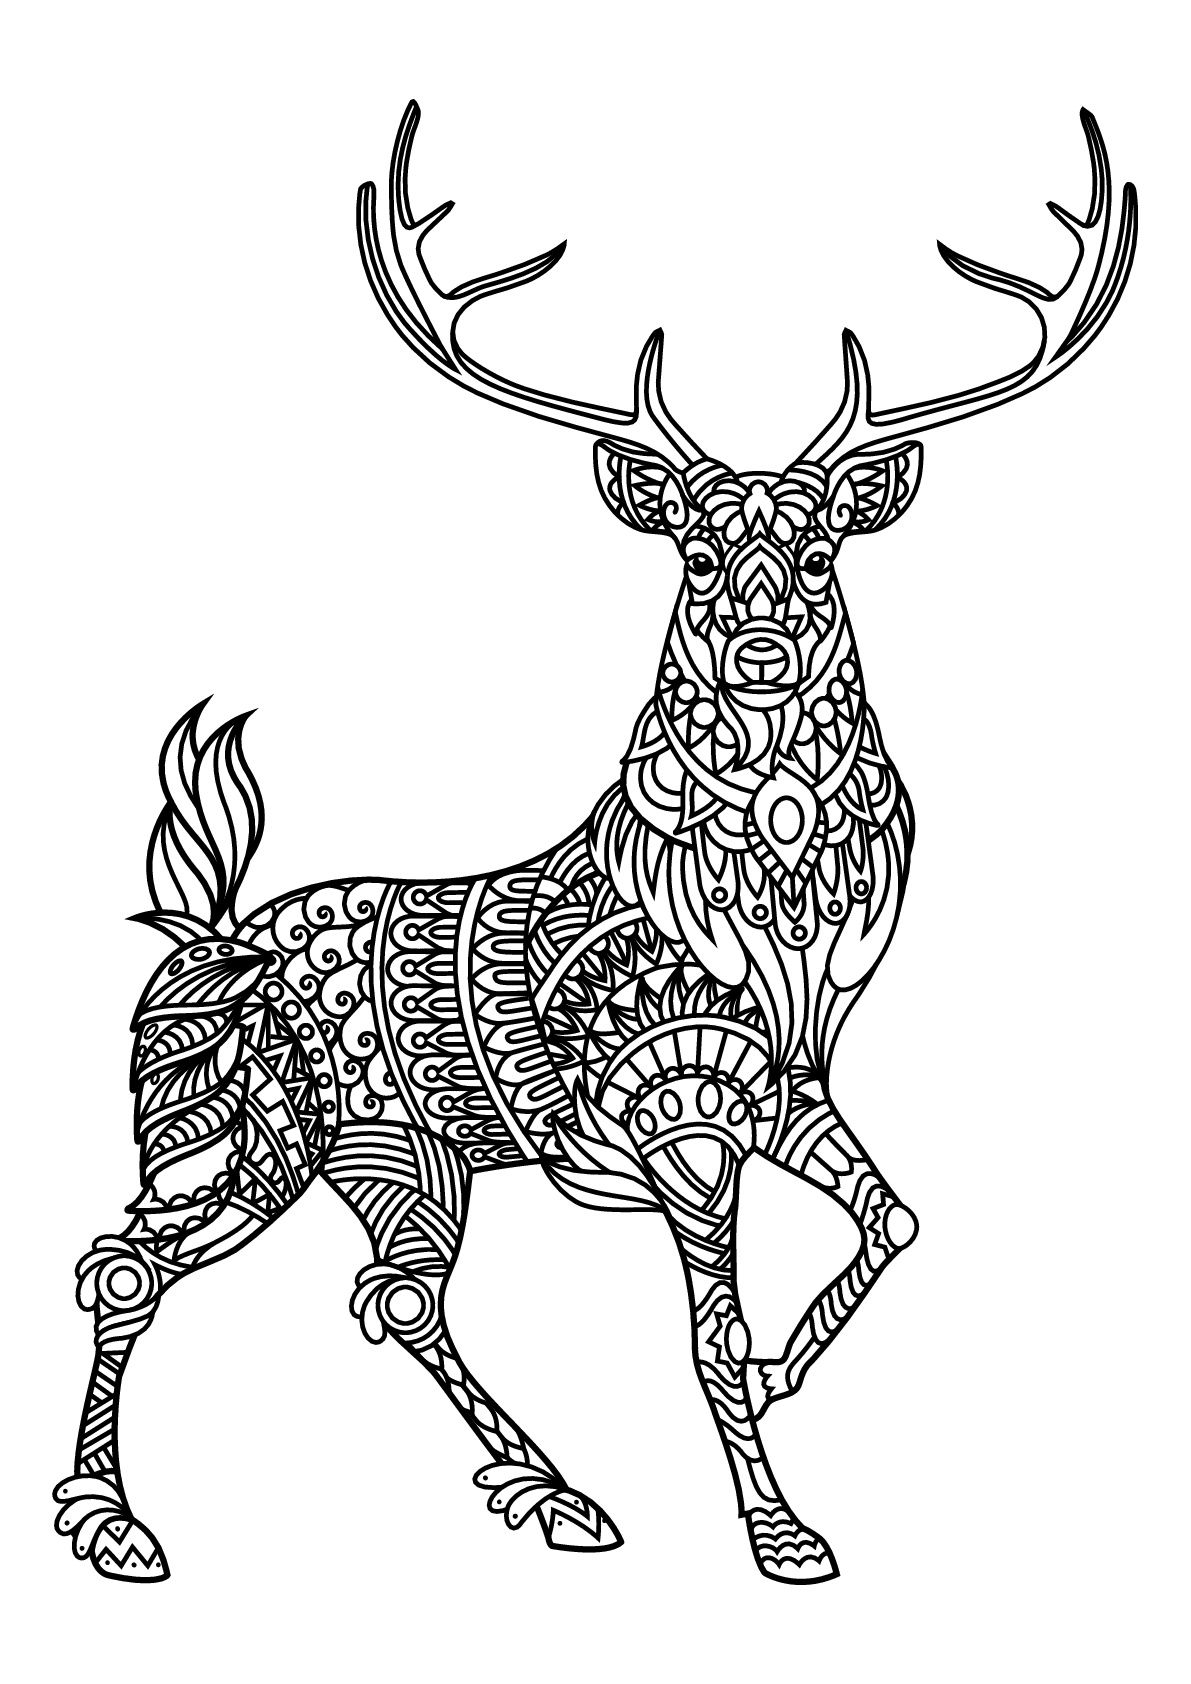 Deer, with complex and beautiful patterns